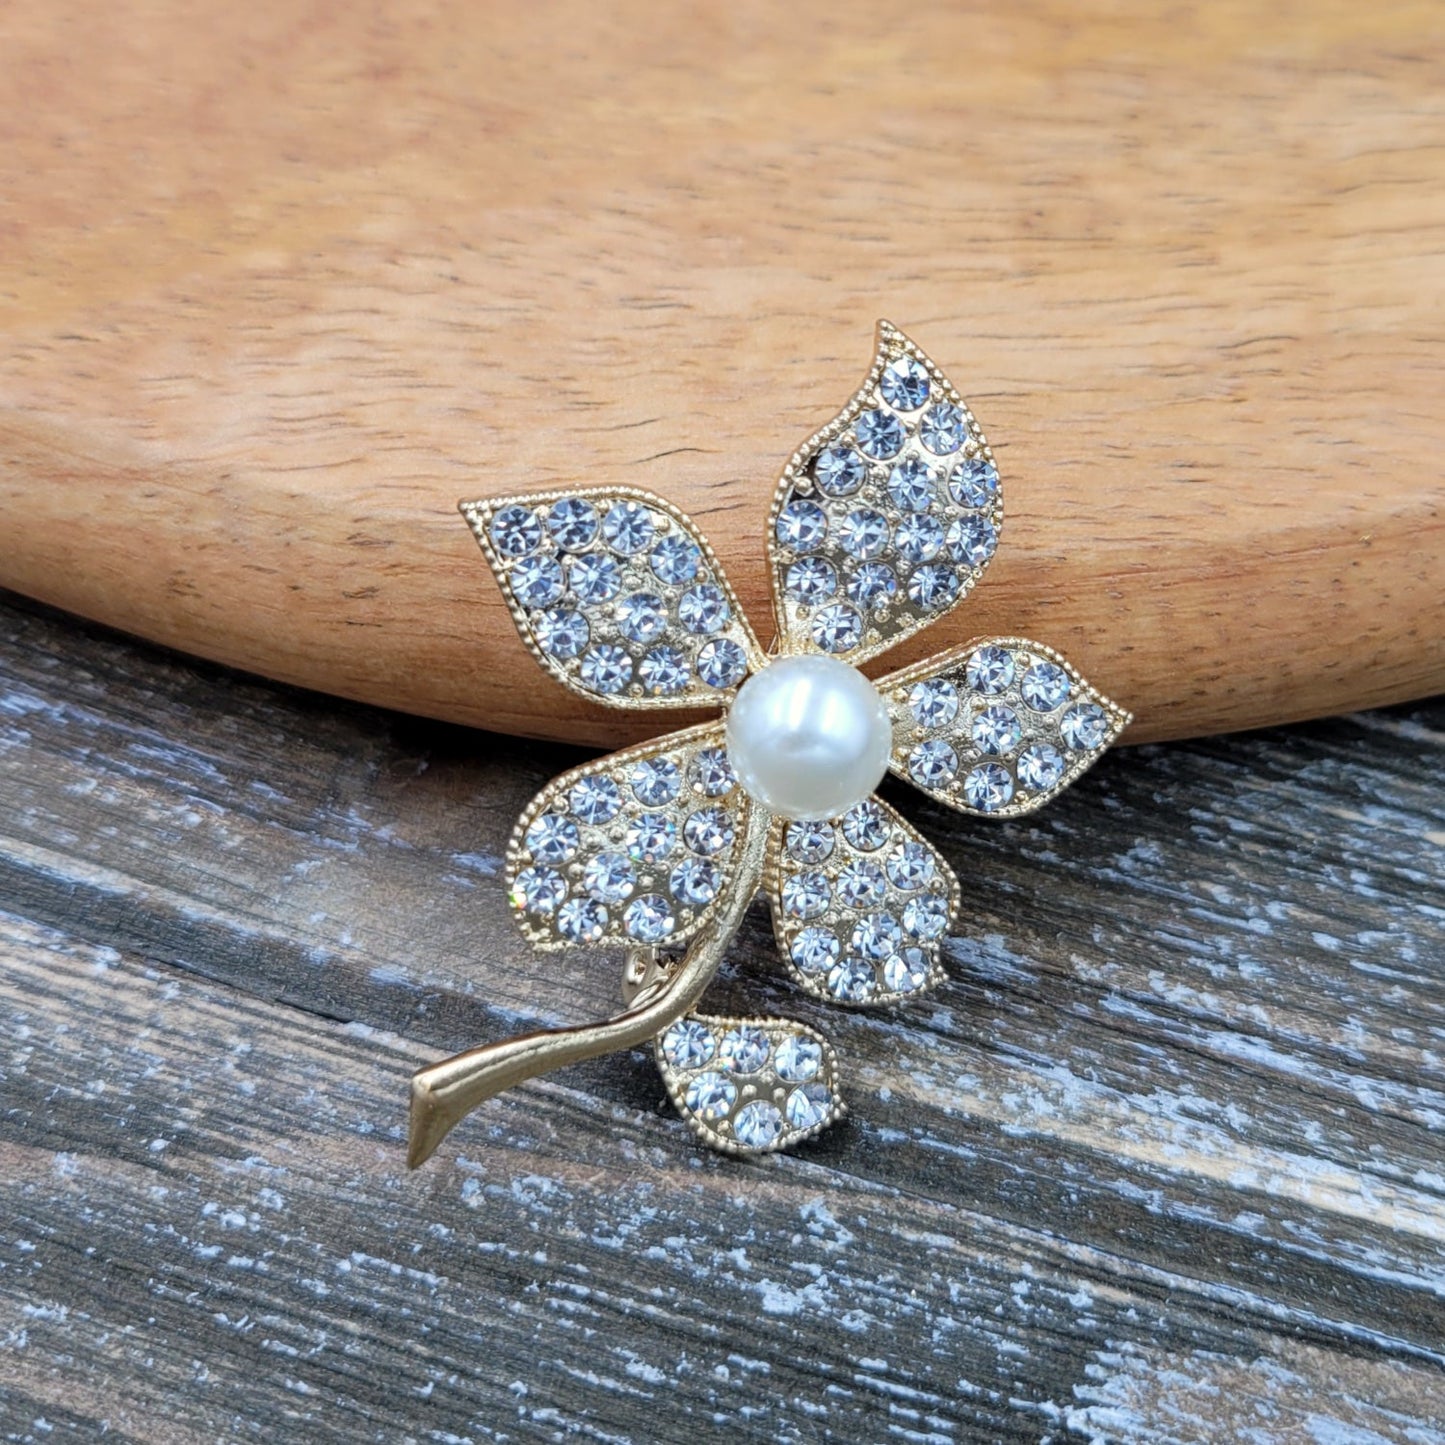 BESHEEK Goldtone, Rhinestone and faux pearl Flower Professional Artisan Brooch Pin | Handmade Hypoallergenic Office, Suit, Networking Style Jewelry